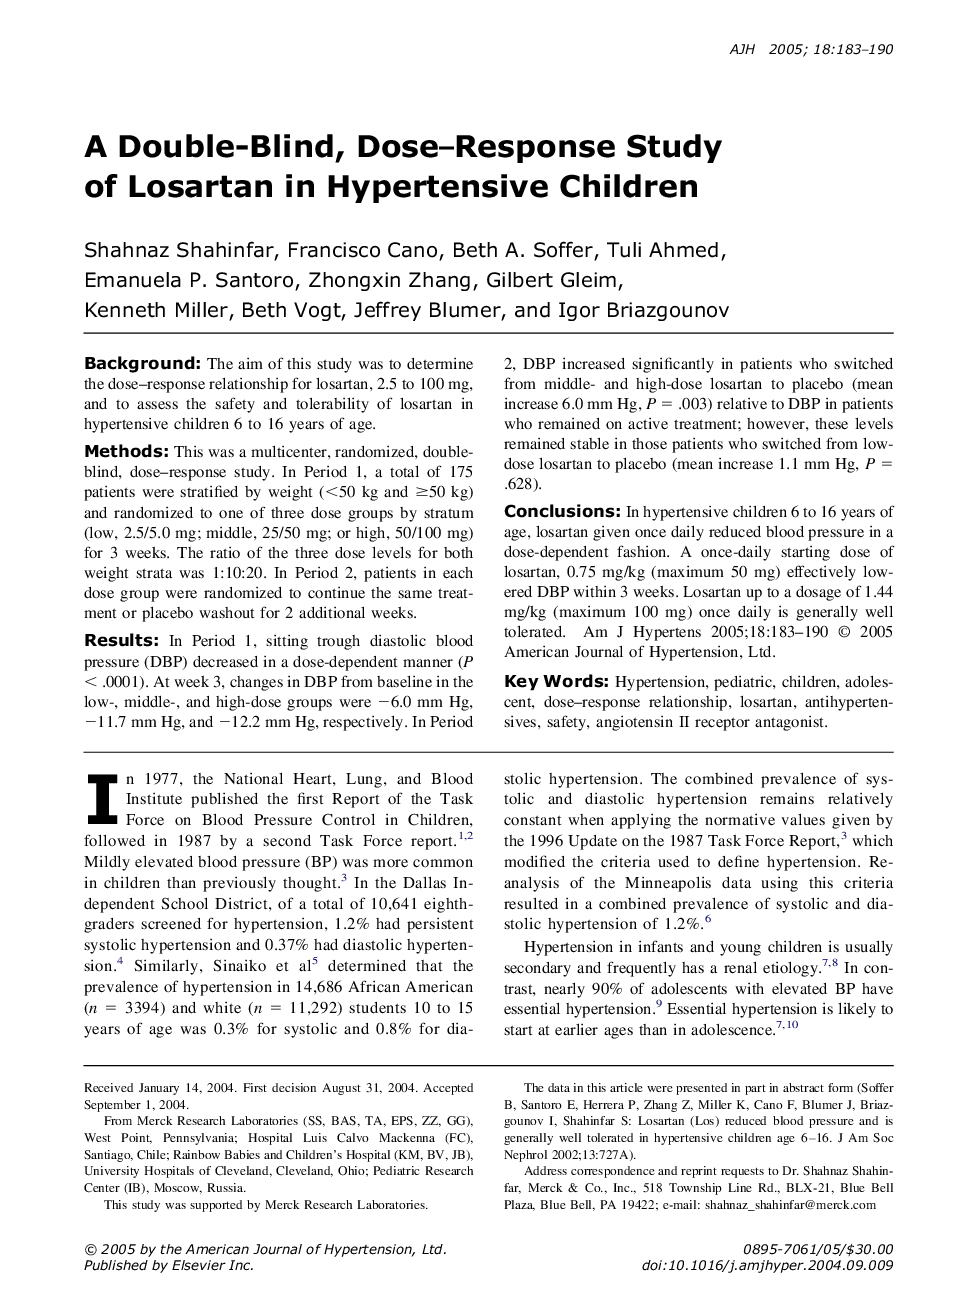 A double-blind, dose-response study of losartan in hypertensive children